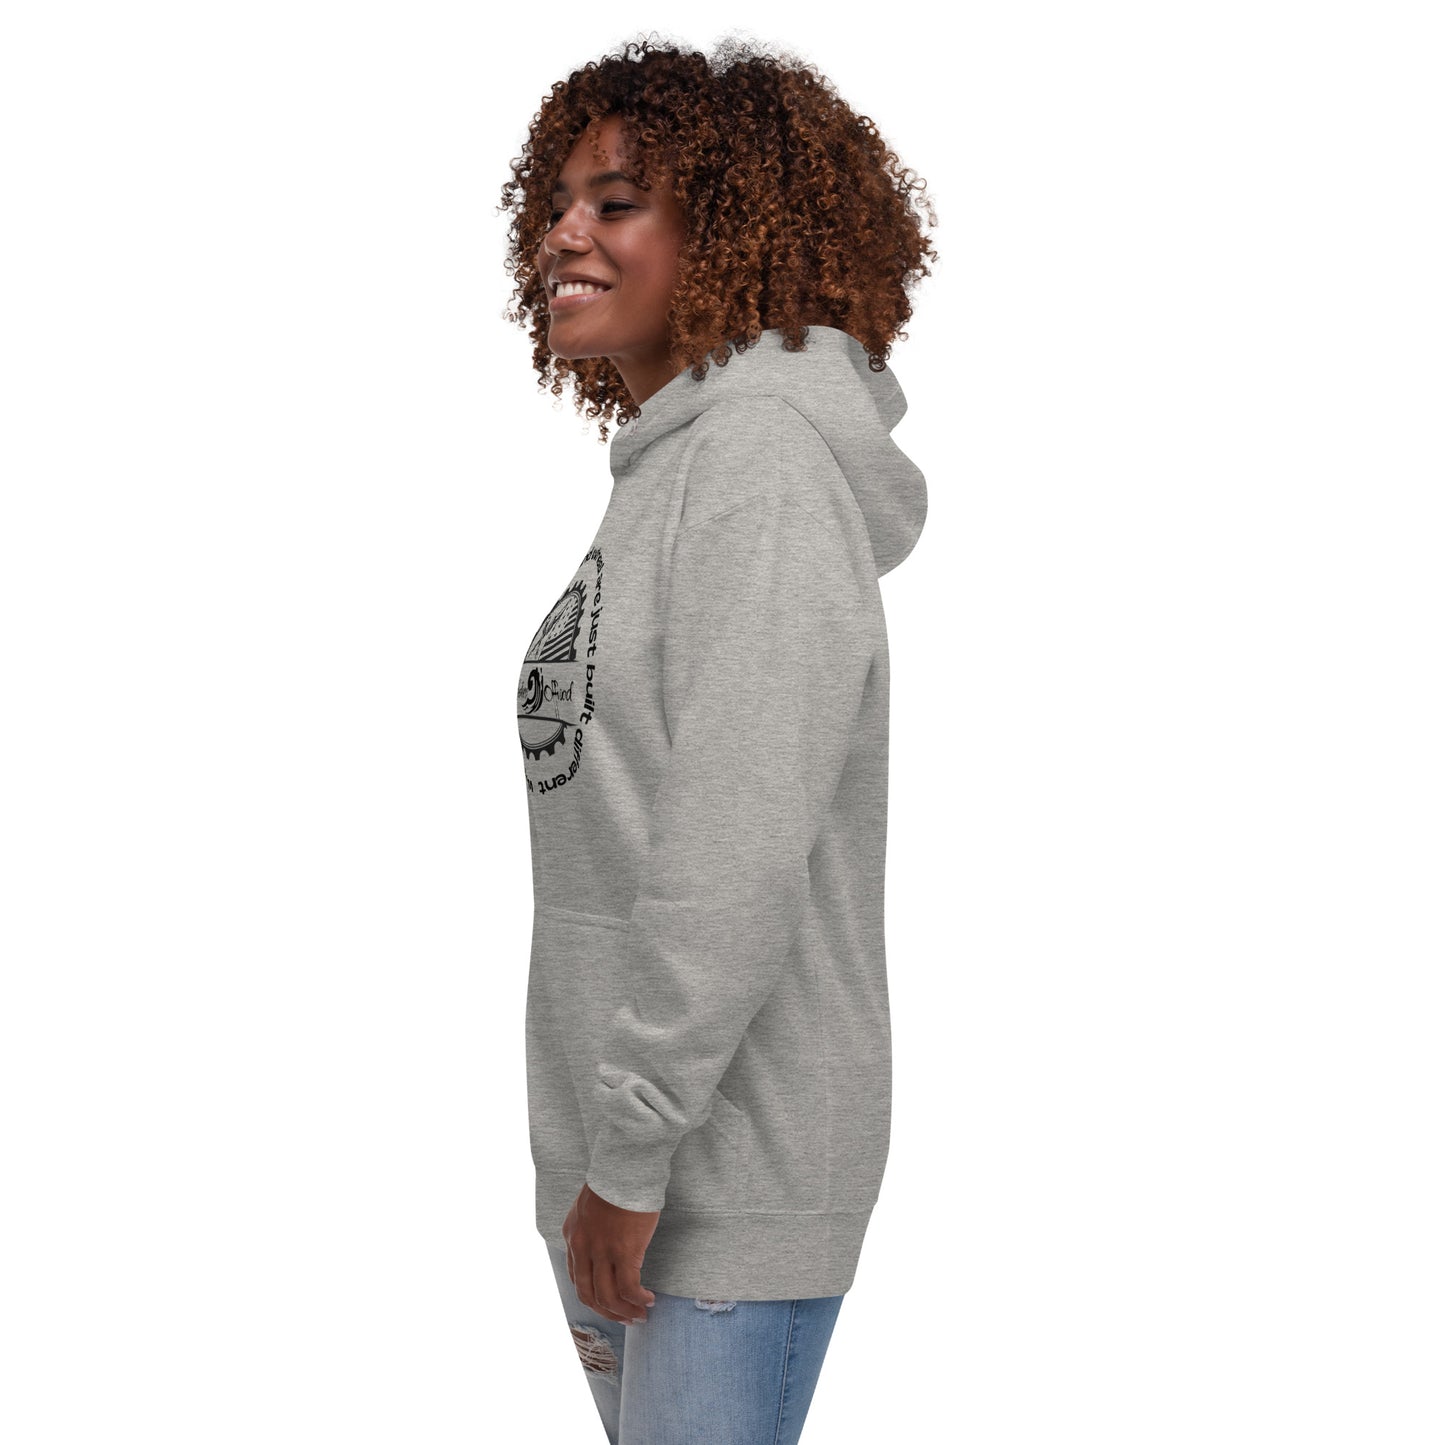 a woman with curly hair wearing a grey hoodie